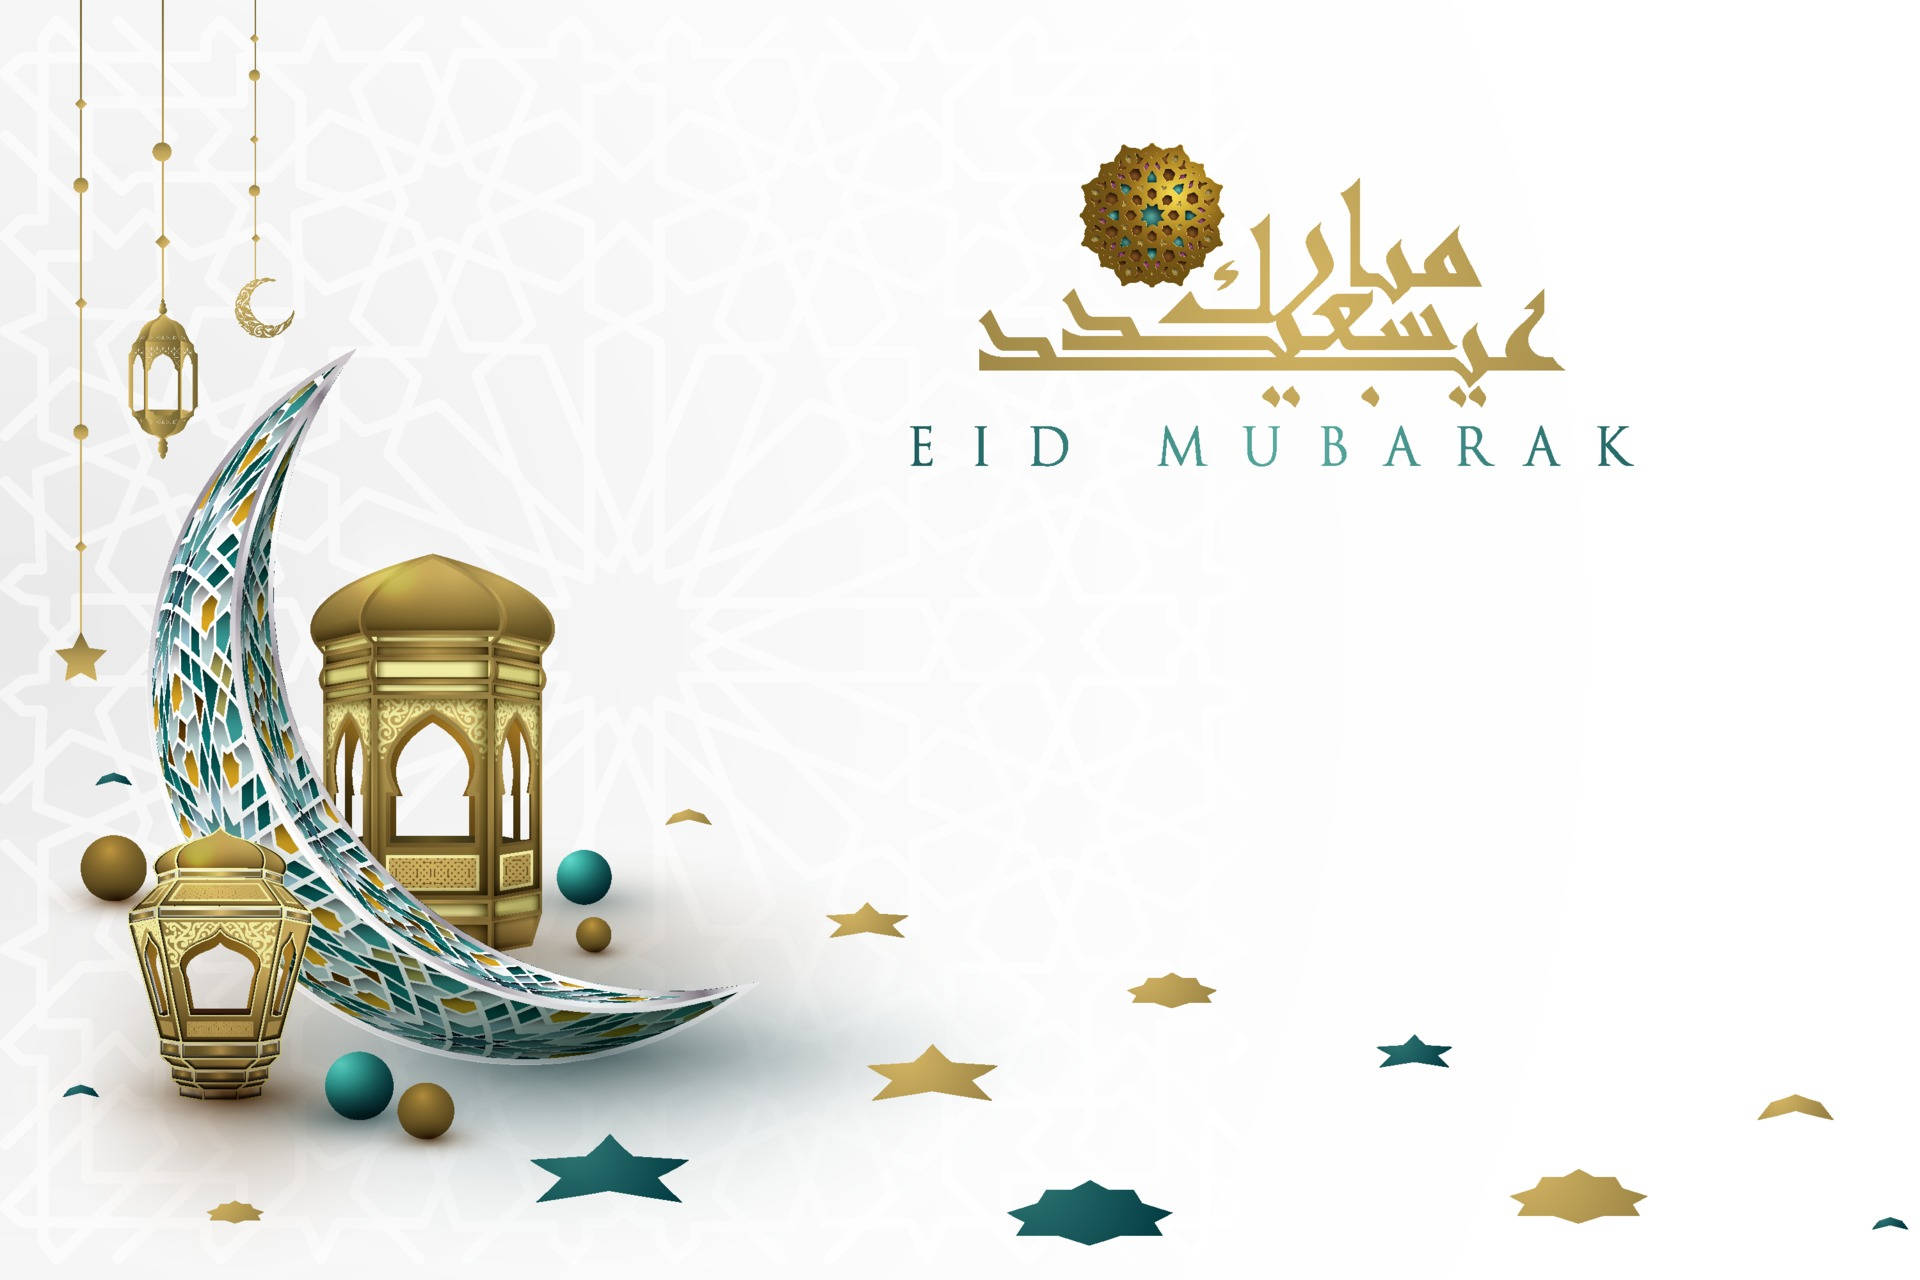 Celebrating Eid Mubarak - A Blessed Time Filled With Joy And Harmony